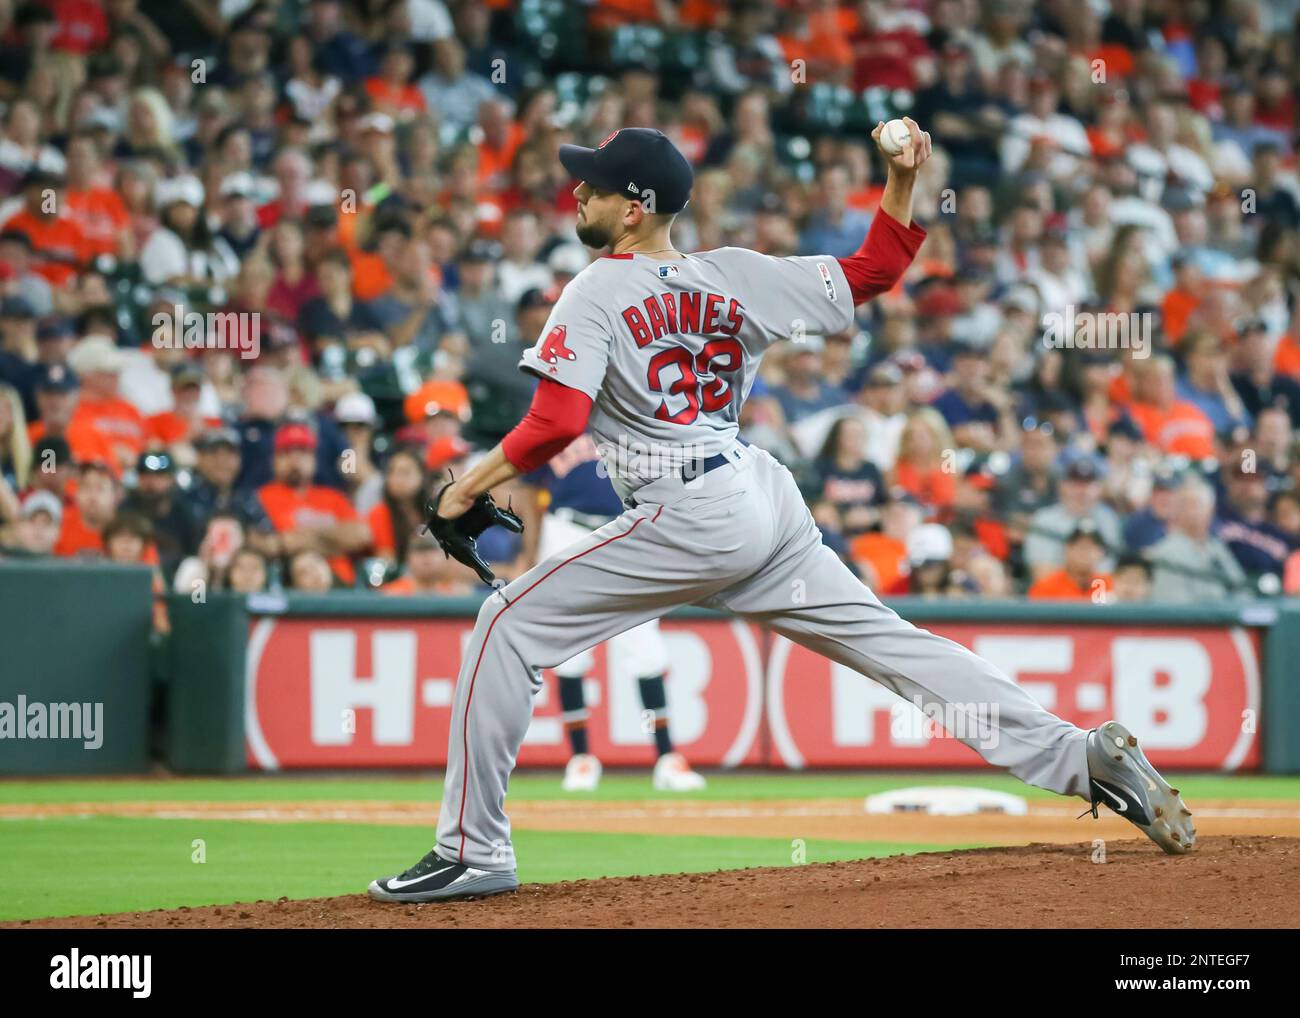 HOUSTON, TX - MAY 26: Boston Red Sox relief pitcher Matt Barnes (32)  prepares to throw a pitch during the game between the Boston Red Sox and  Houston Astros on May 26,